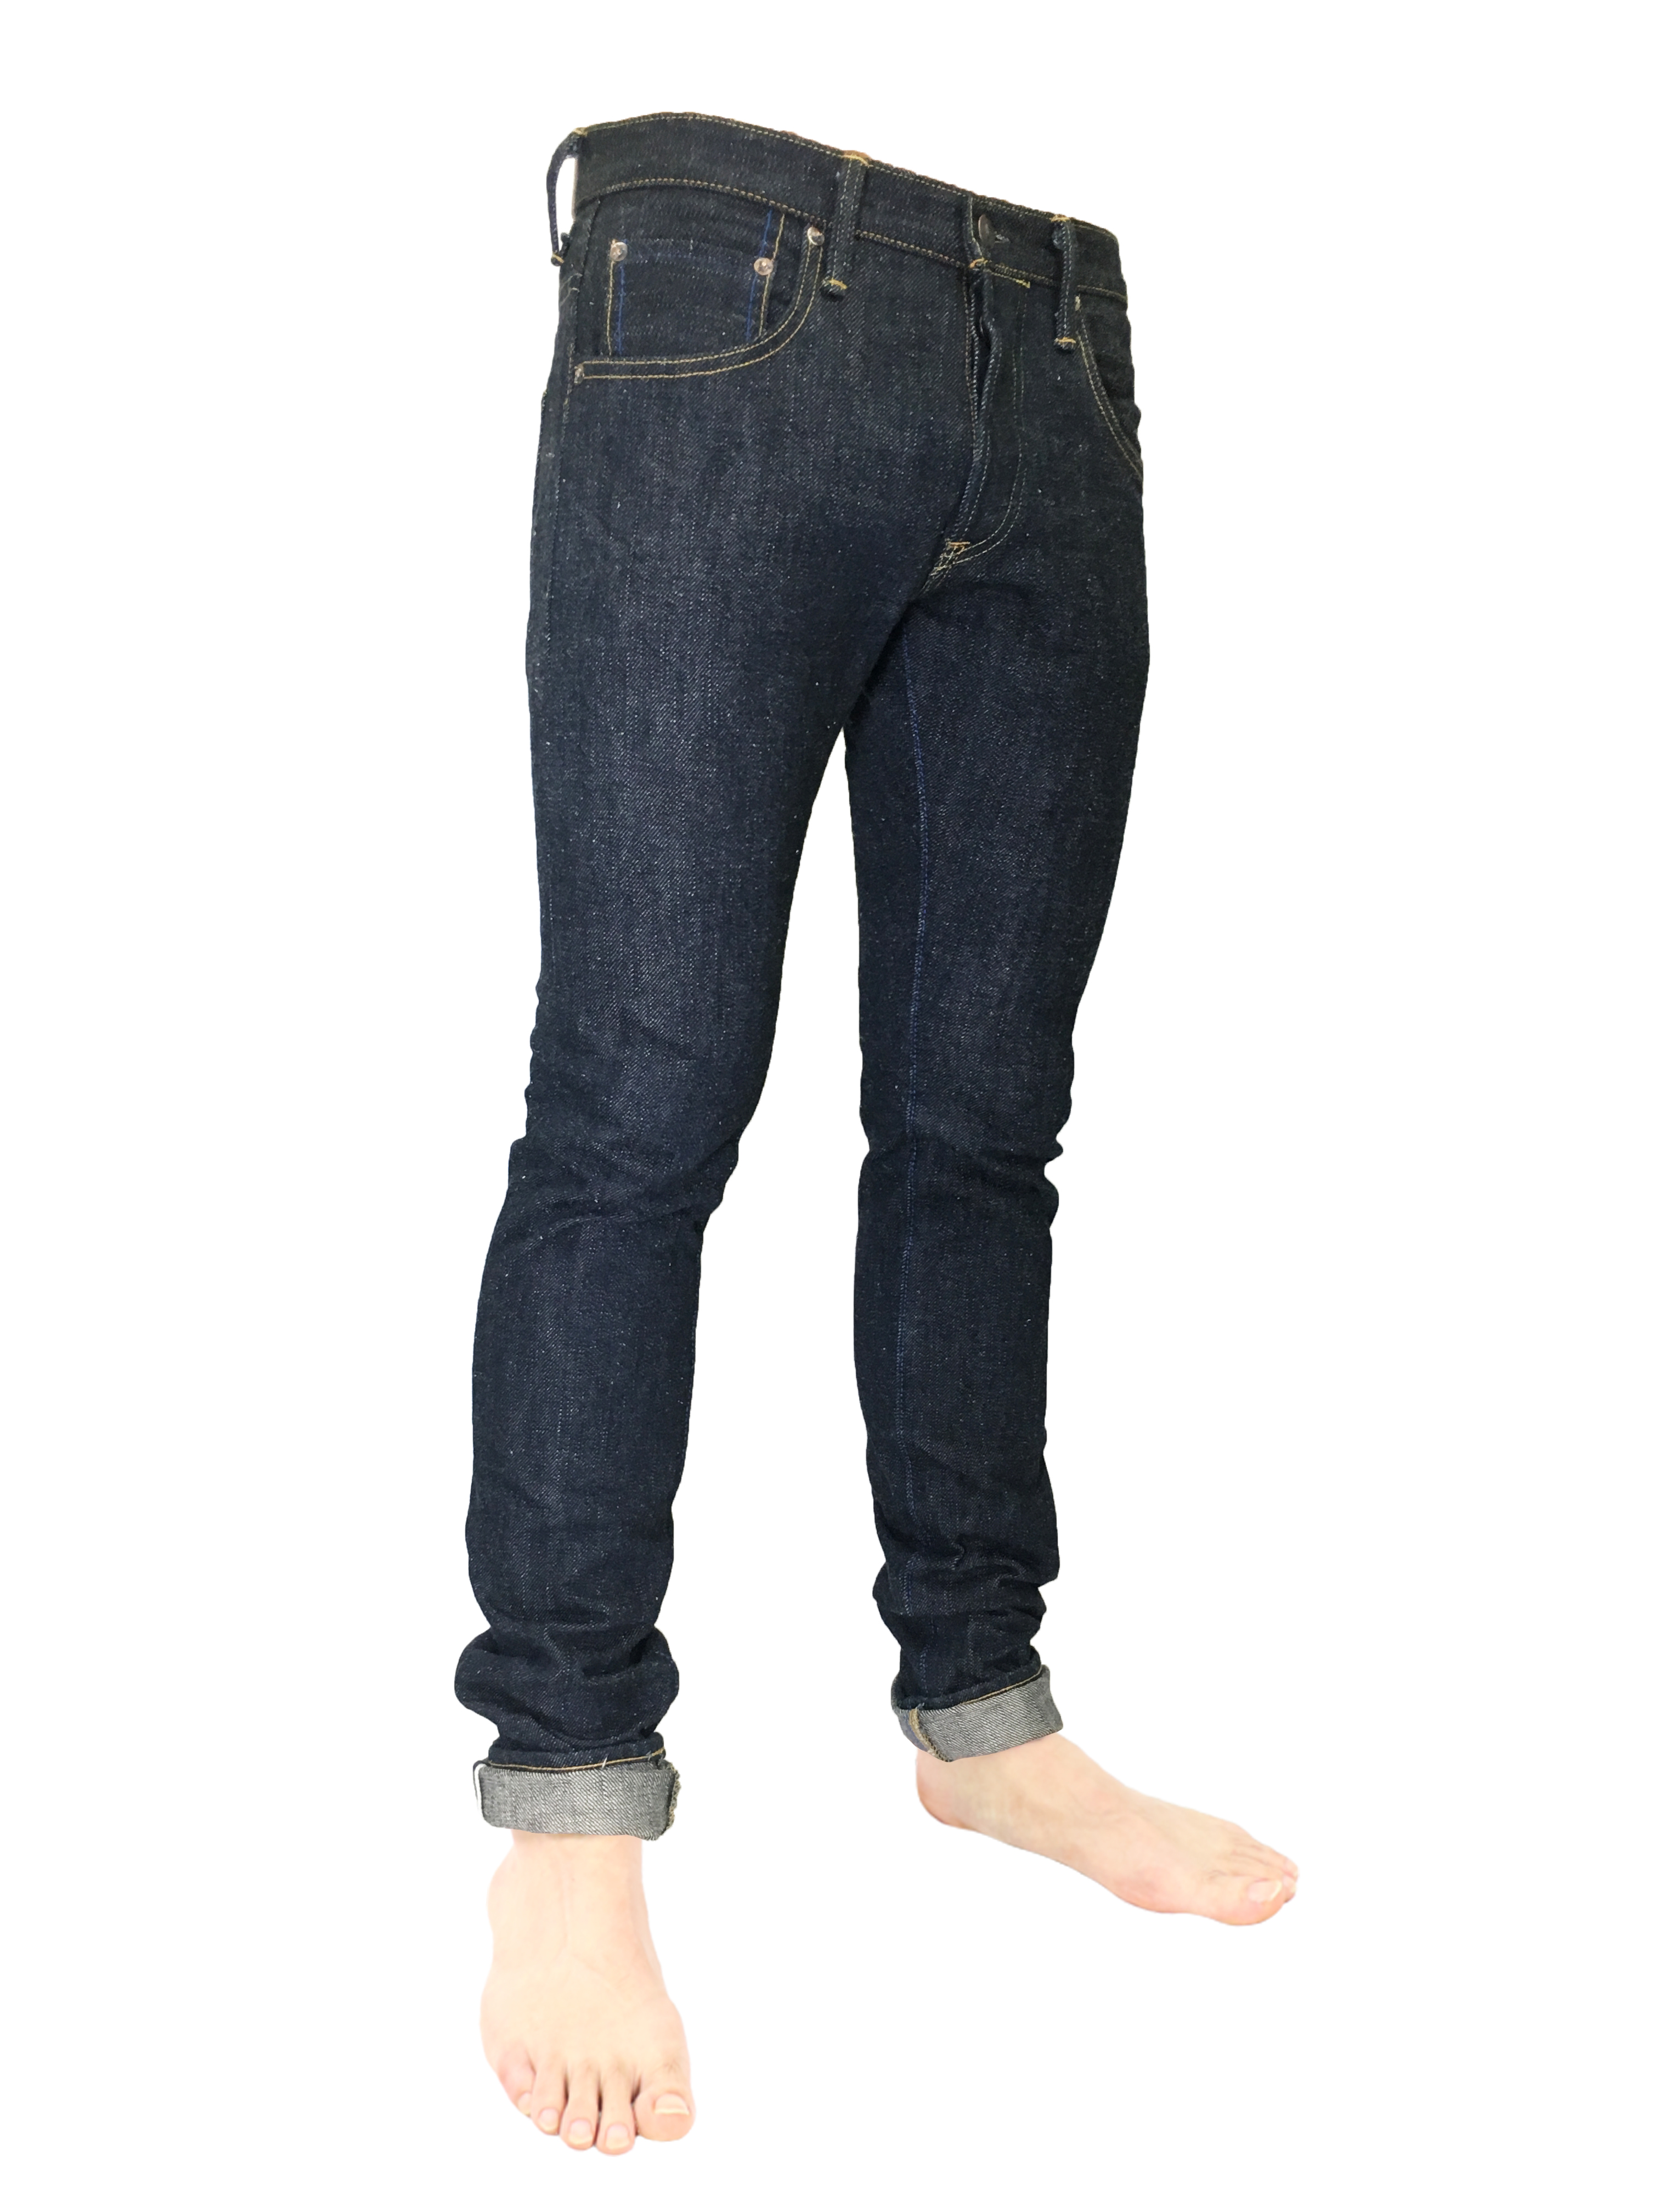 ET 18oz "Earth" Tapered Jeans